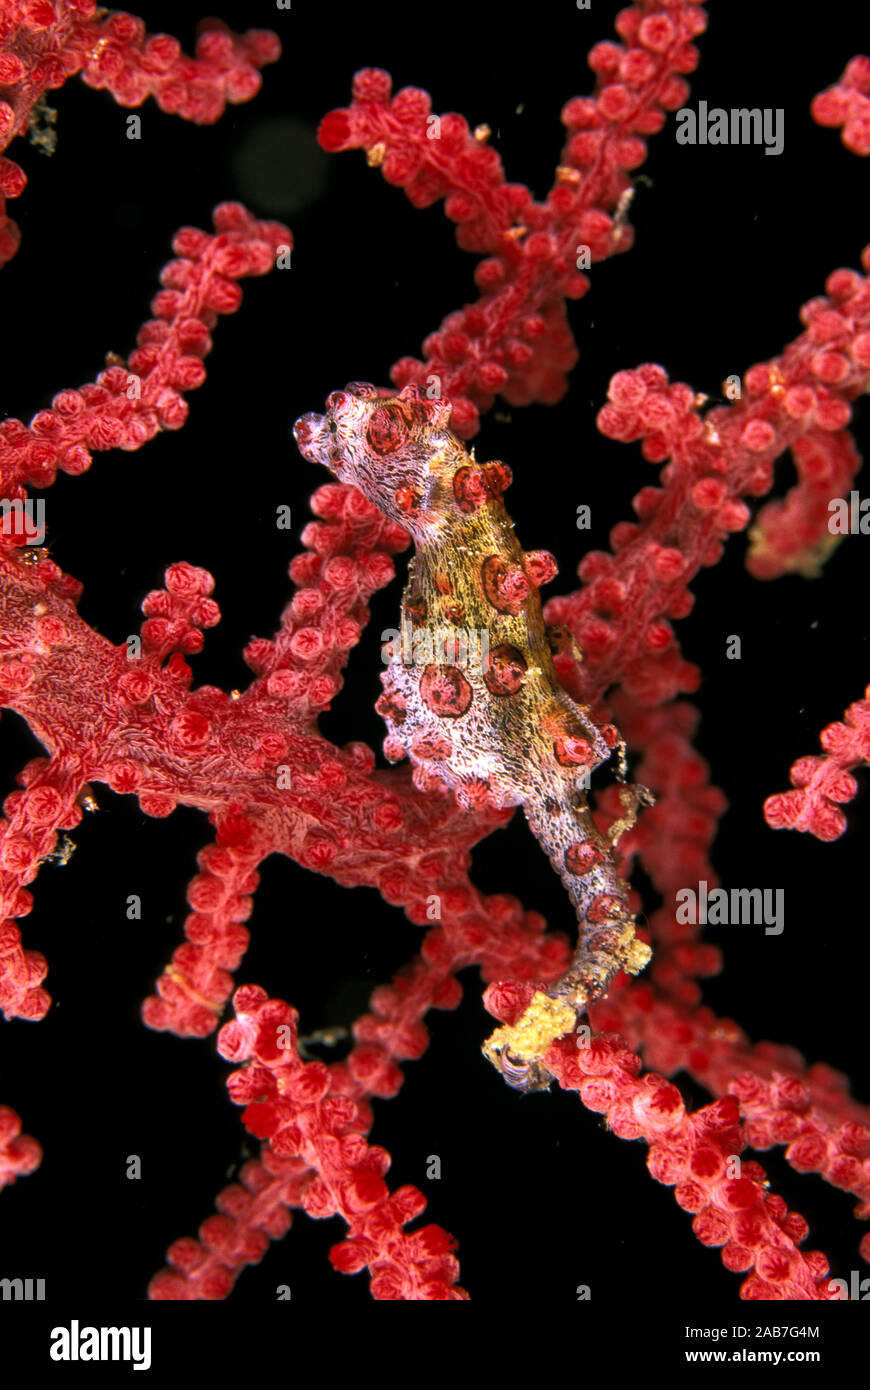 Pygmy seahorse (Hippocampus bargibanti), max 2 cms; only known to occur on Gorgonian coral Muricella. Port Moresby, Papua New Guinea Stock Photo